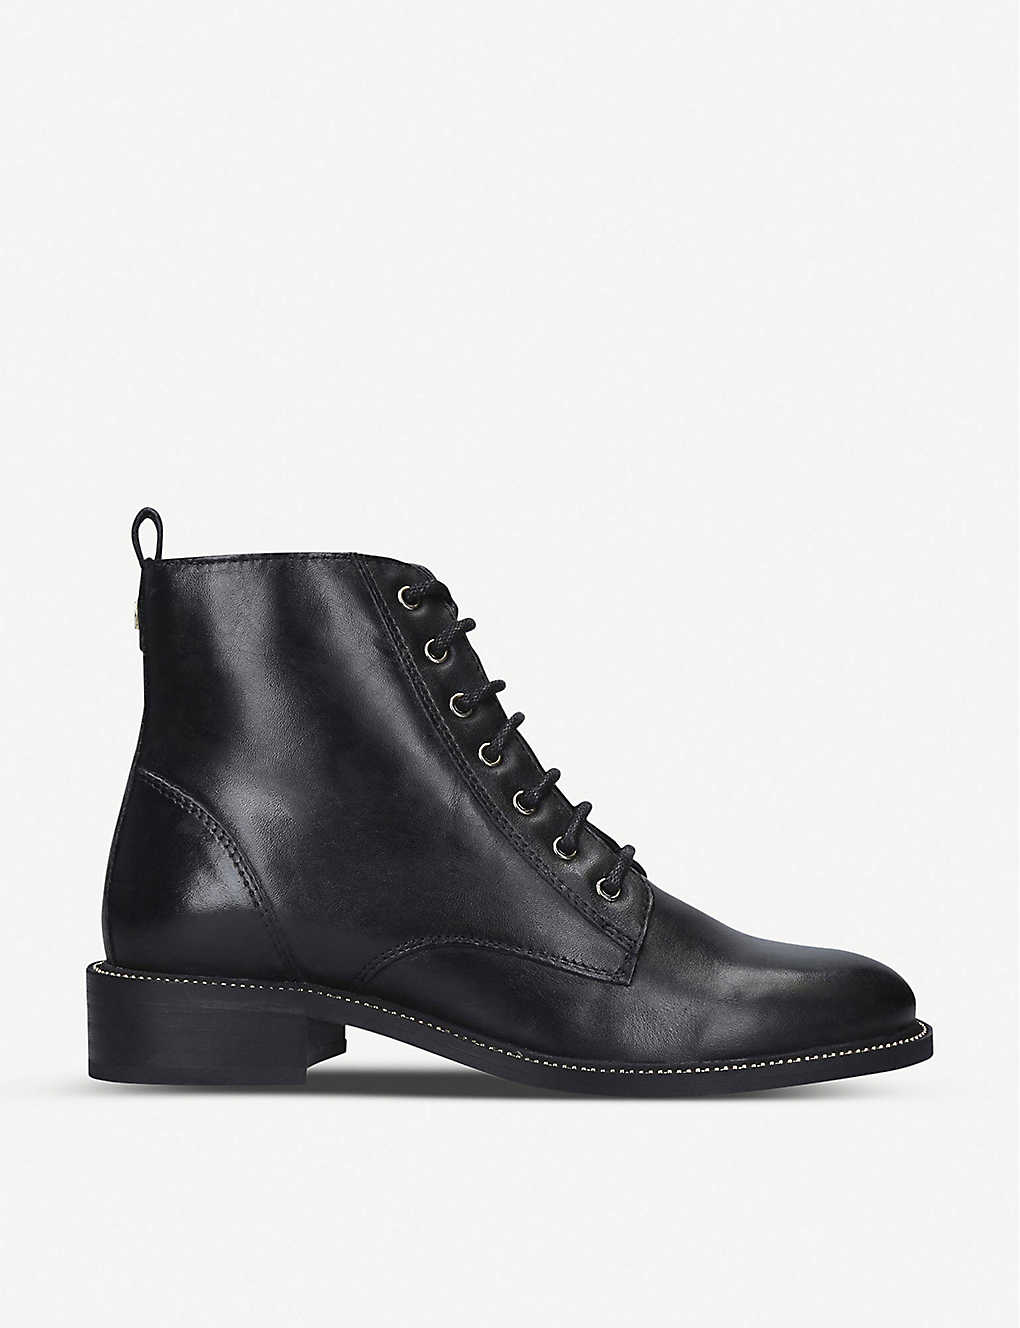 Carvela Spike Patent Leather Ankle Boots In Black